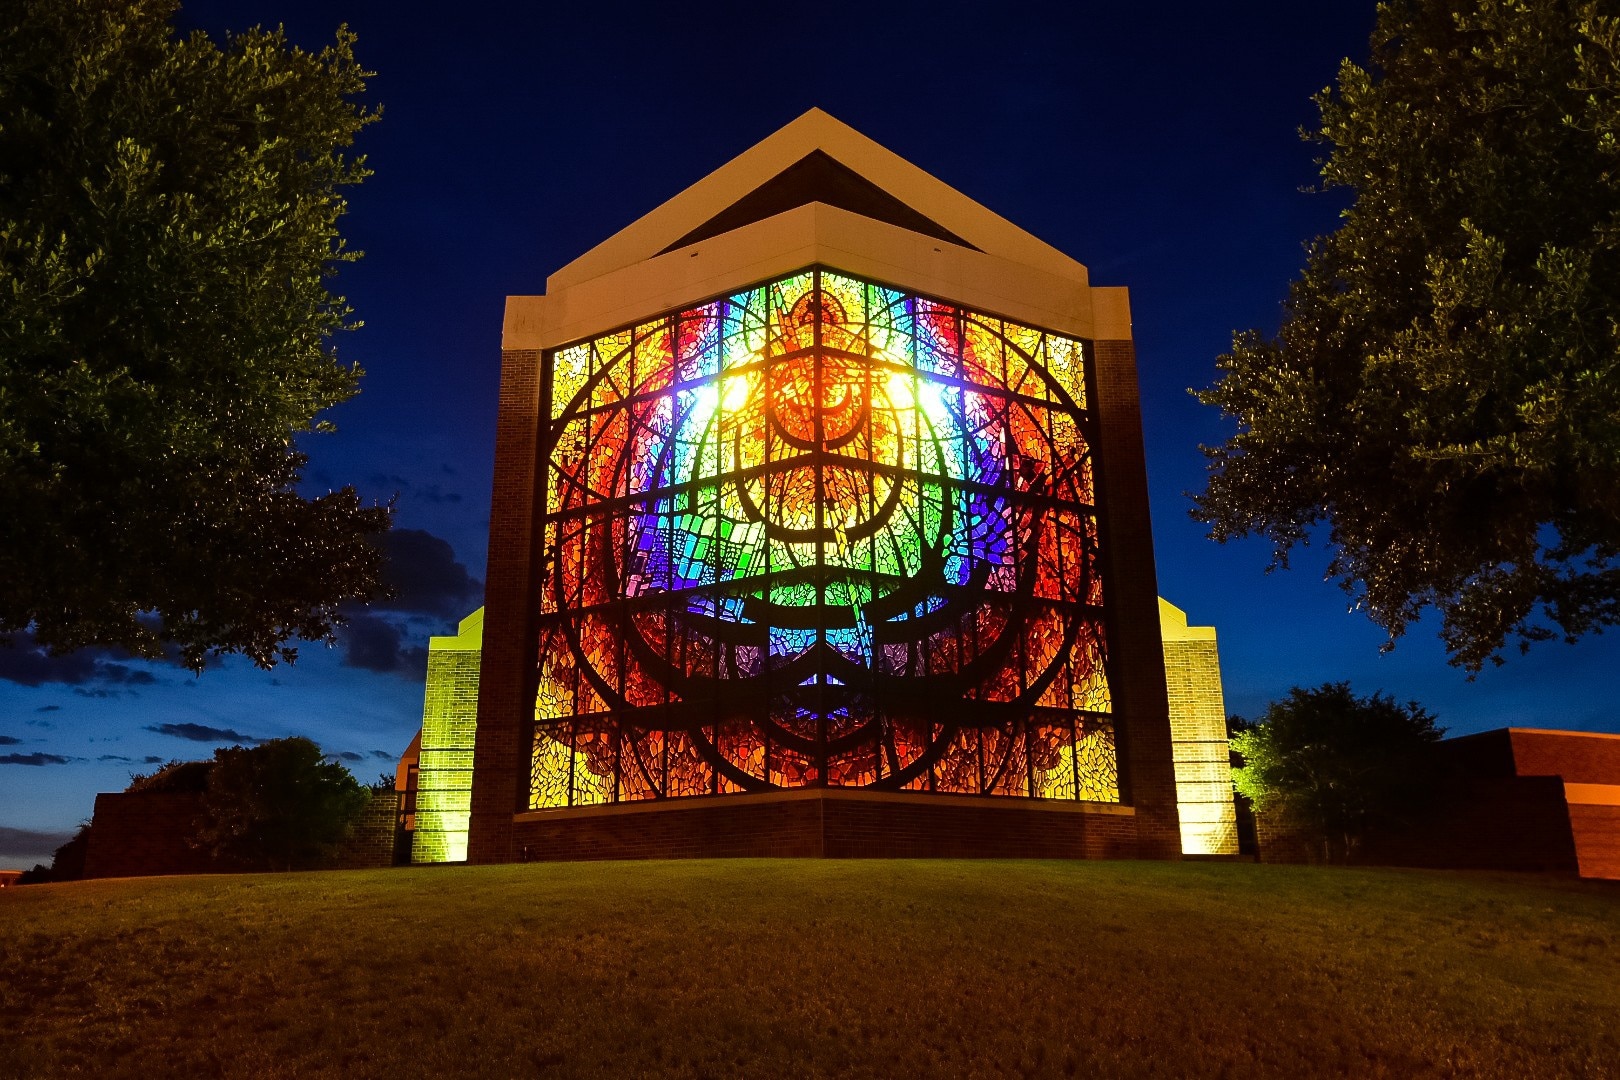 While on a recent family roadtrip I stumbled across this amazing stained glass on the campus.  
I was driving to a different area to go shooting and felt obligated to stop and shoot this amazing work!
I love exploring unfamiliar areas to find these photographic gems!